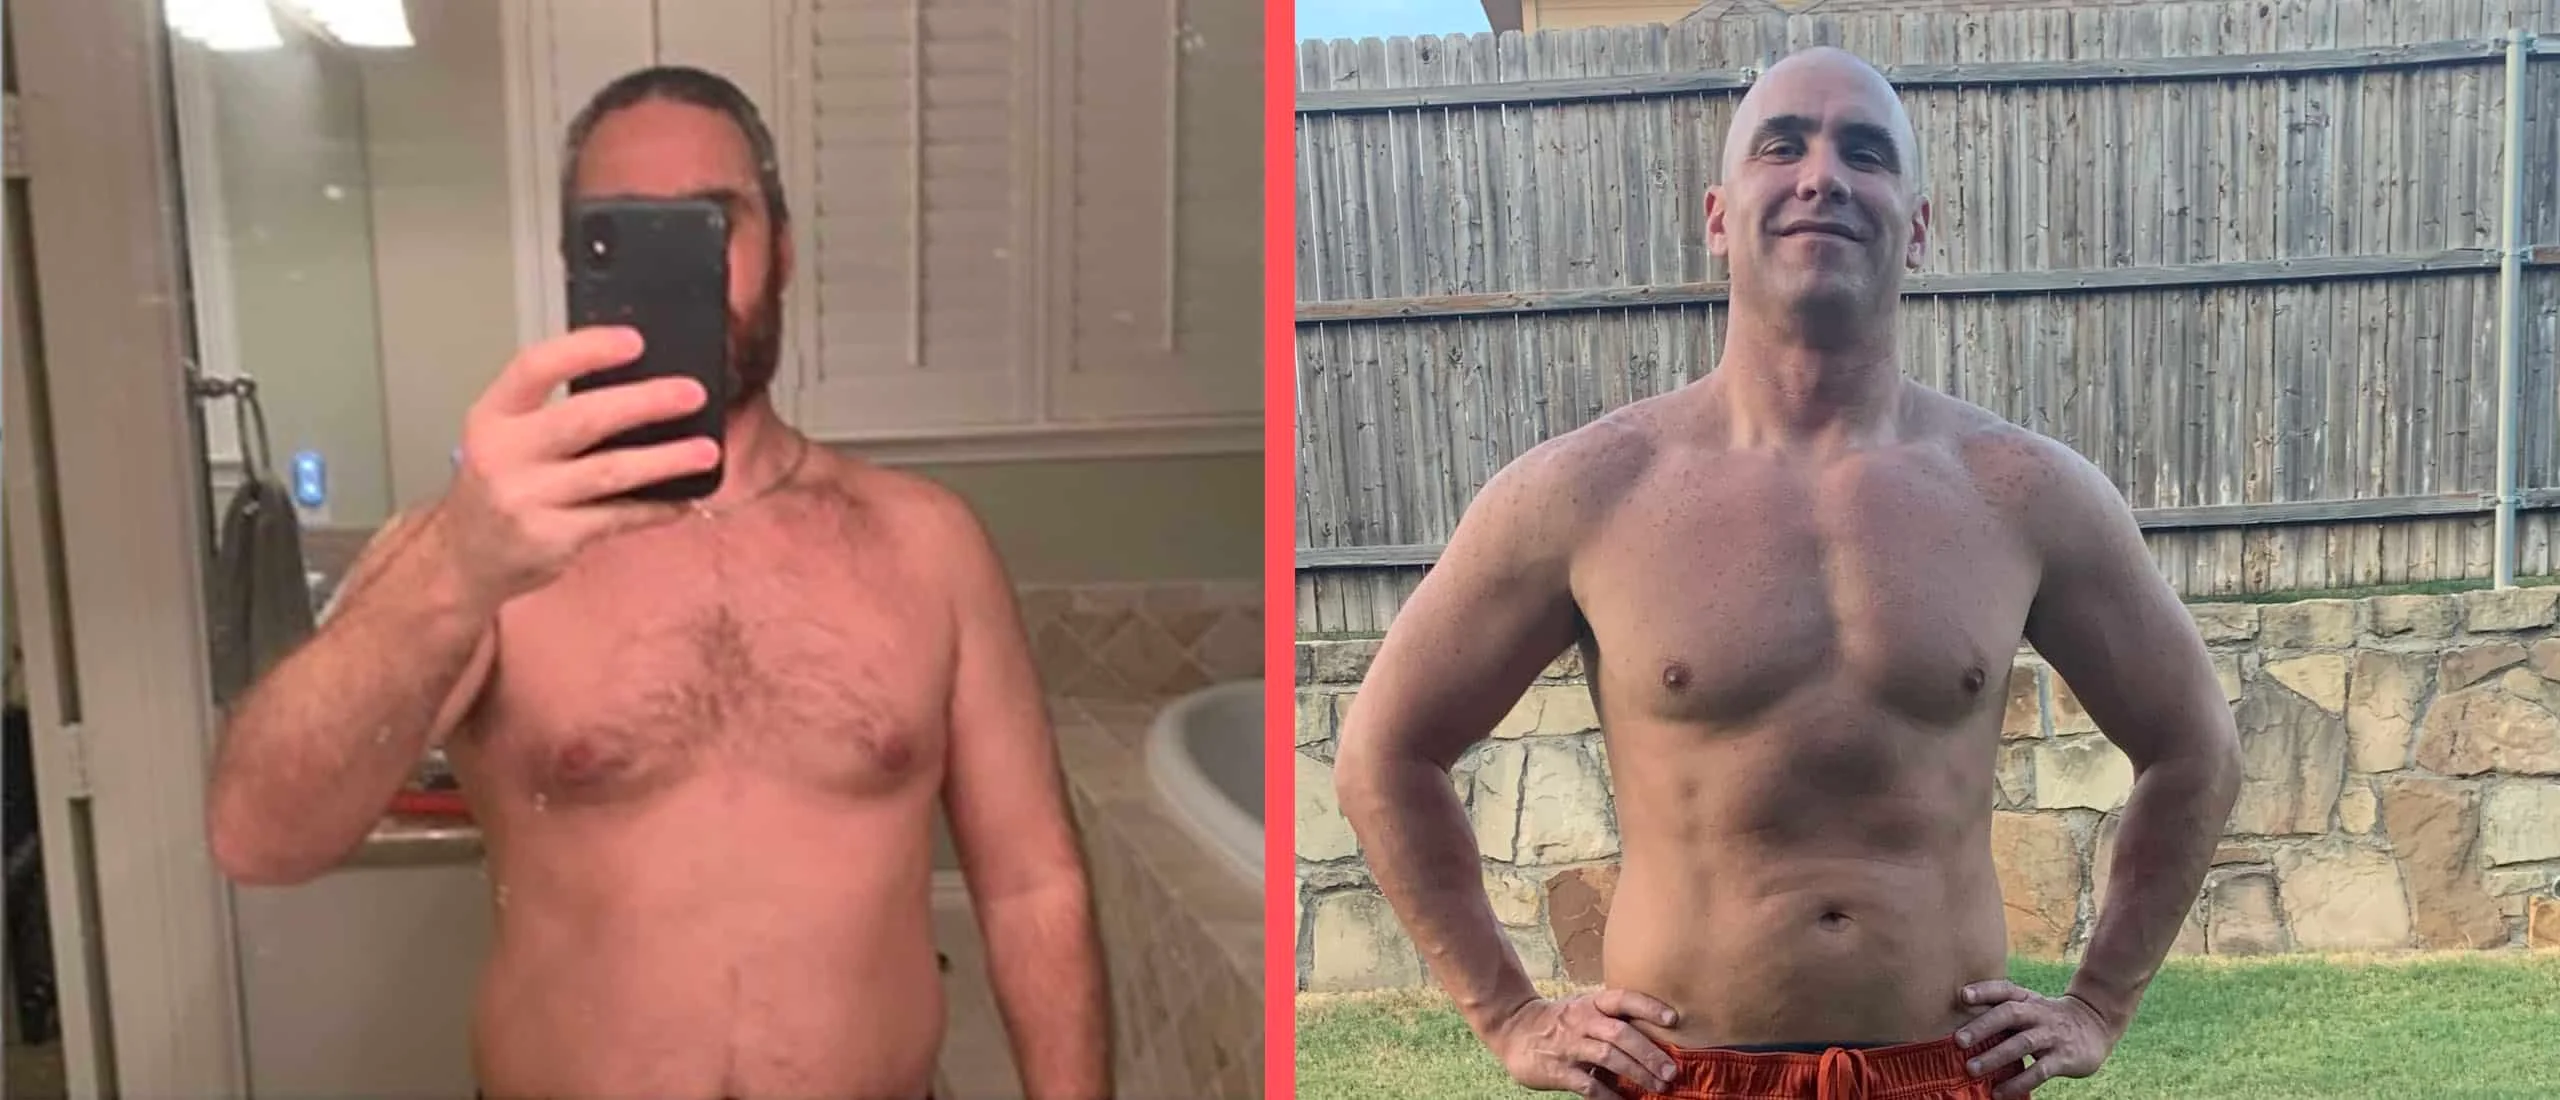 Kevin Gallagher, before and after TRT